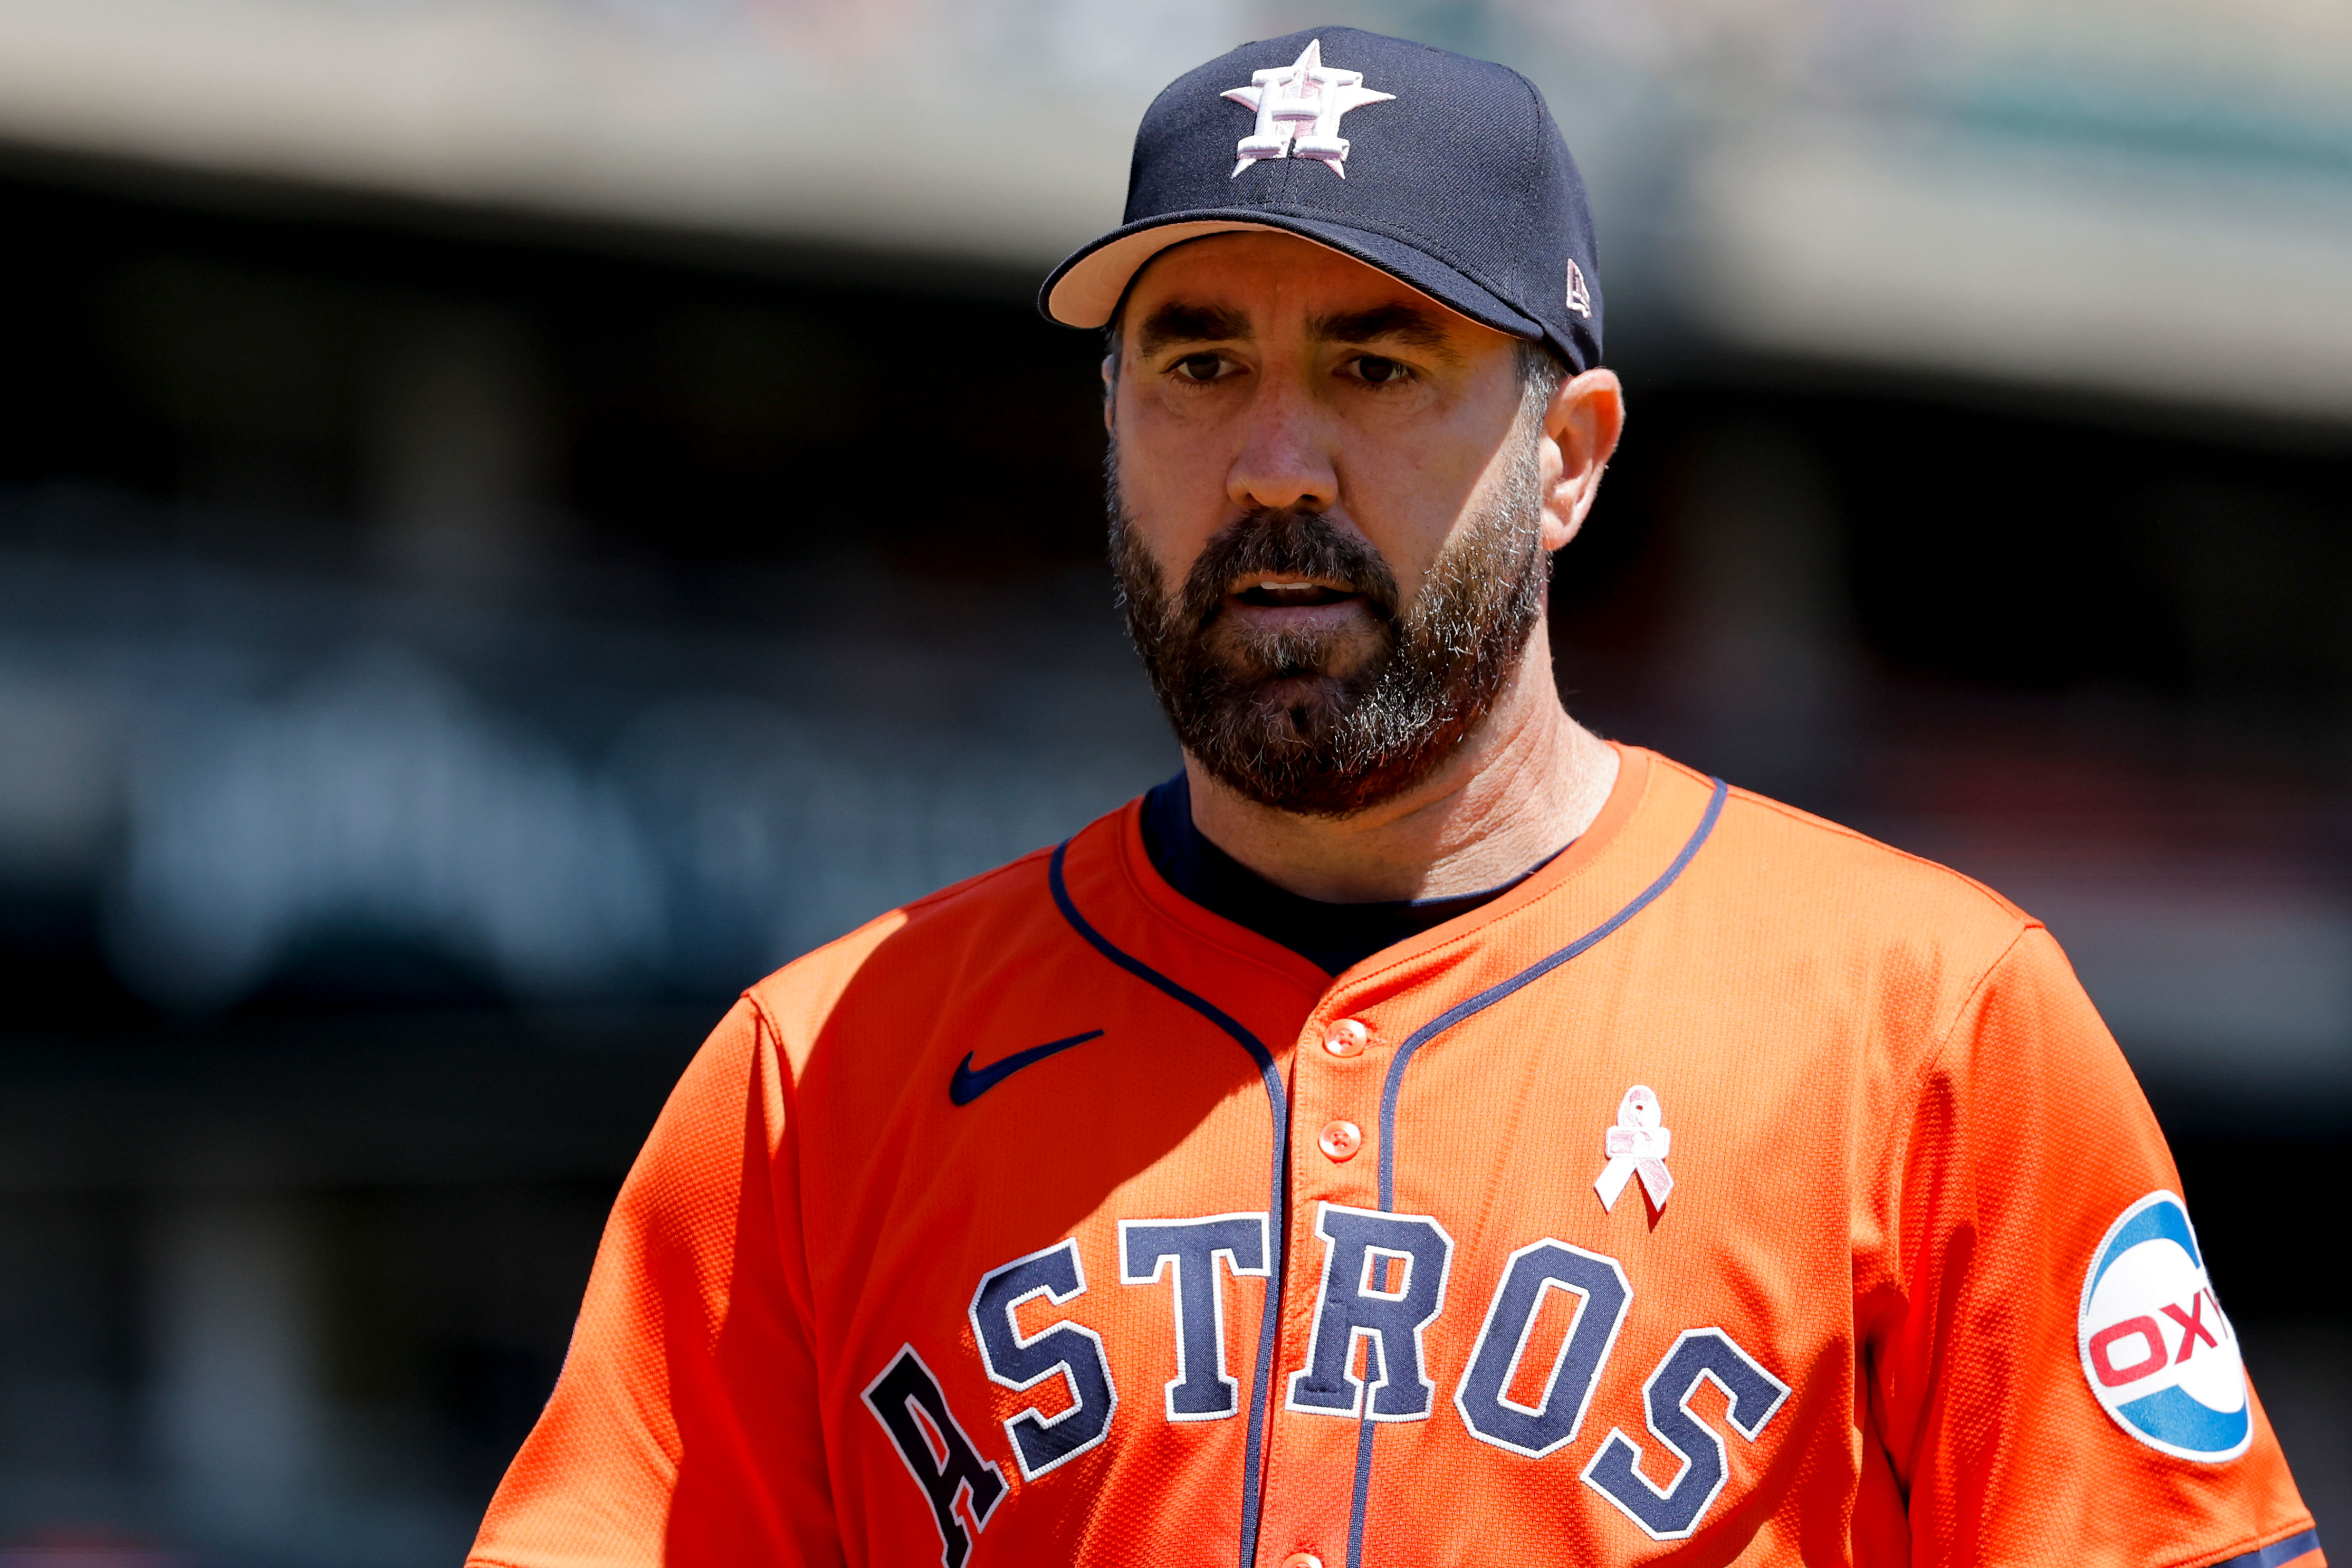 Could Justin Verlander be the next Phillies ace?